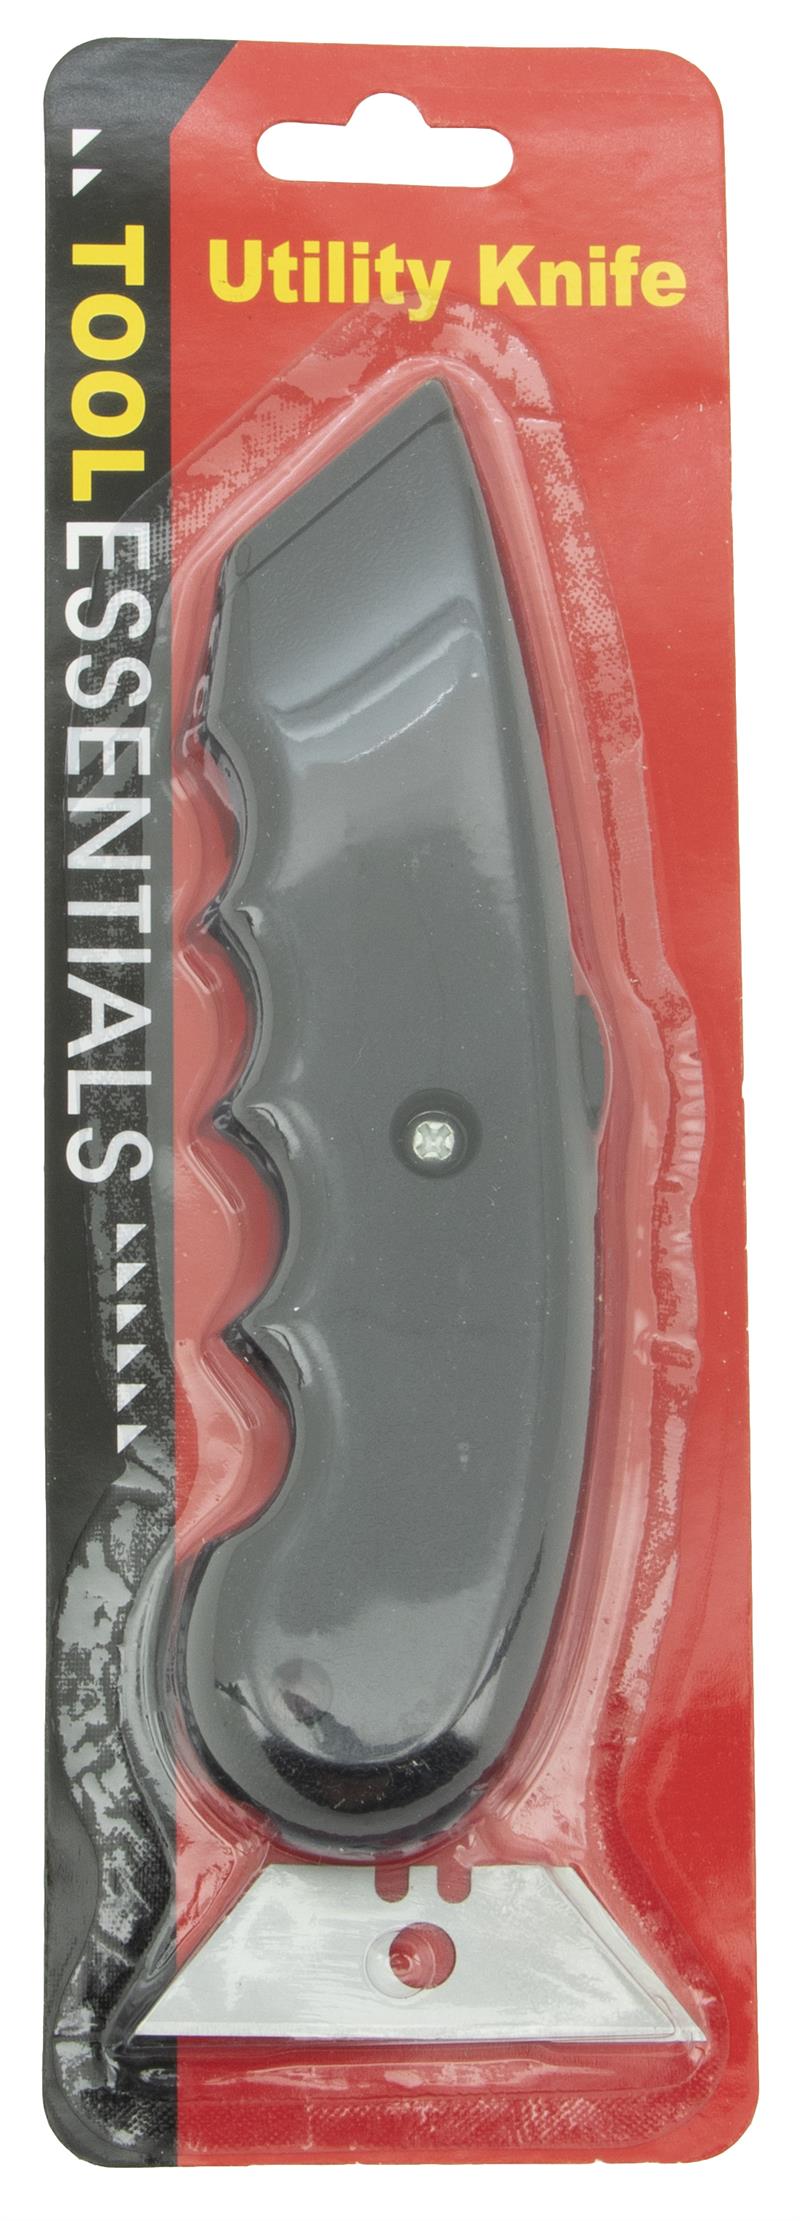 Retractable Utility KNIFE with Plastic Body